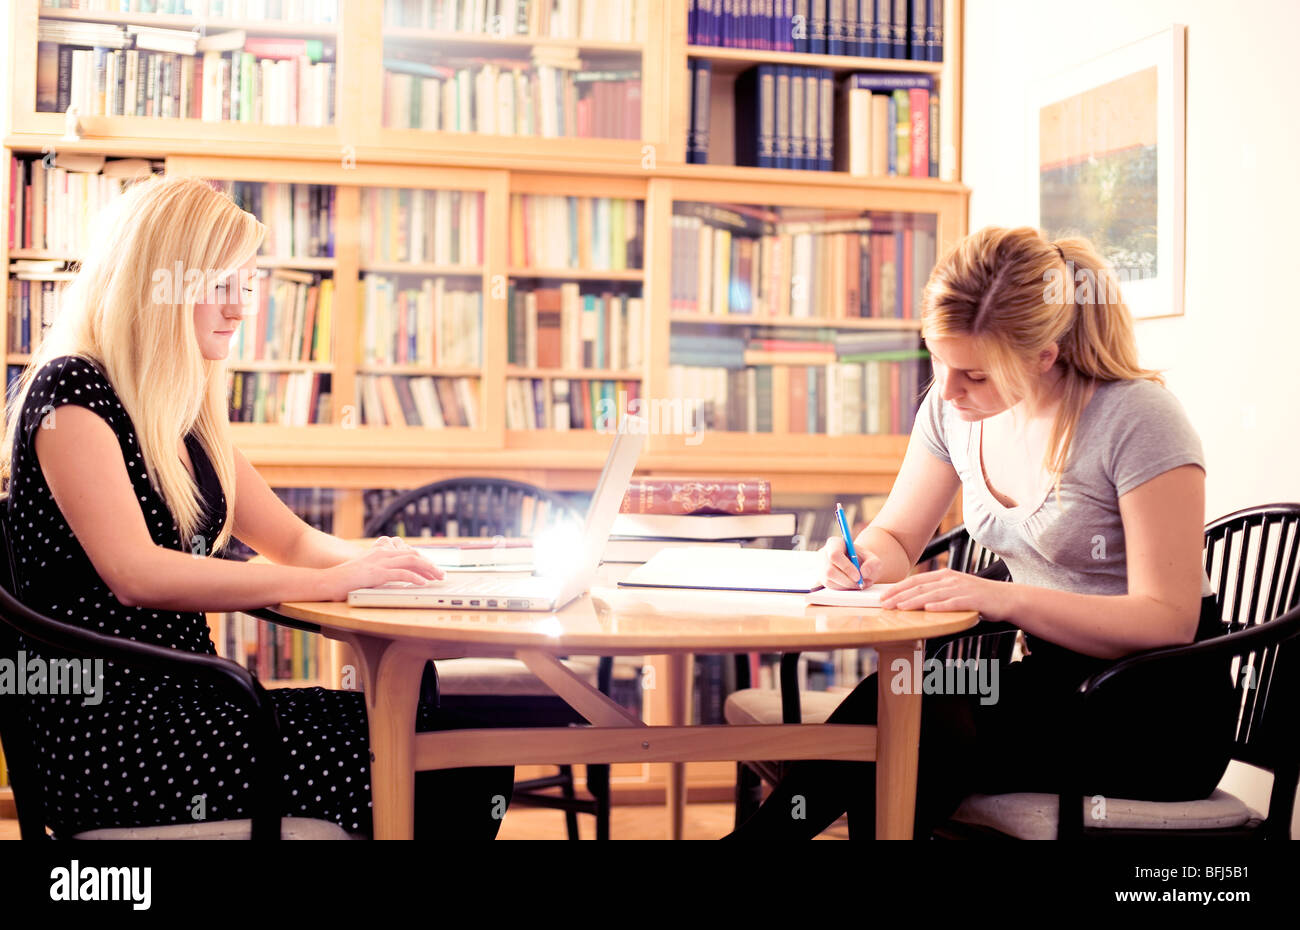 Two young Scandinavian women in a library, Sweden. Stock Photo